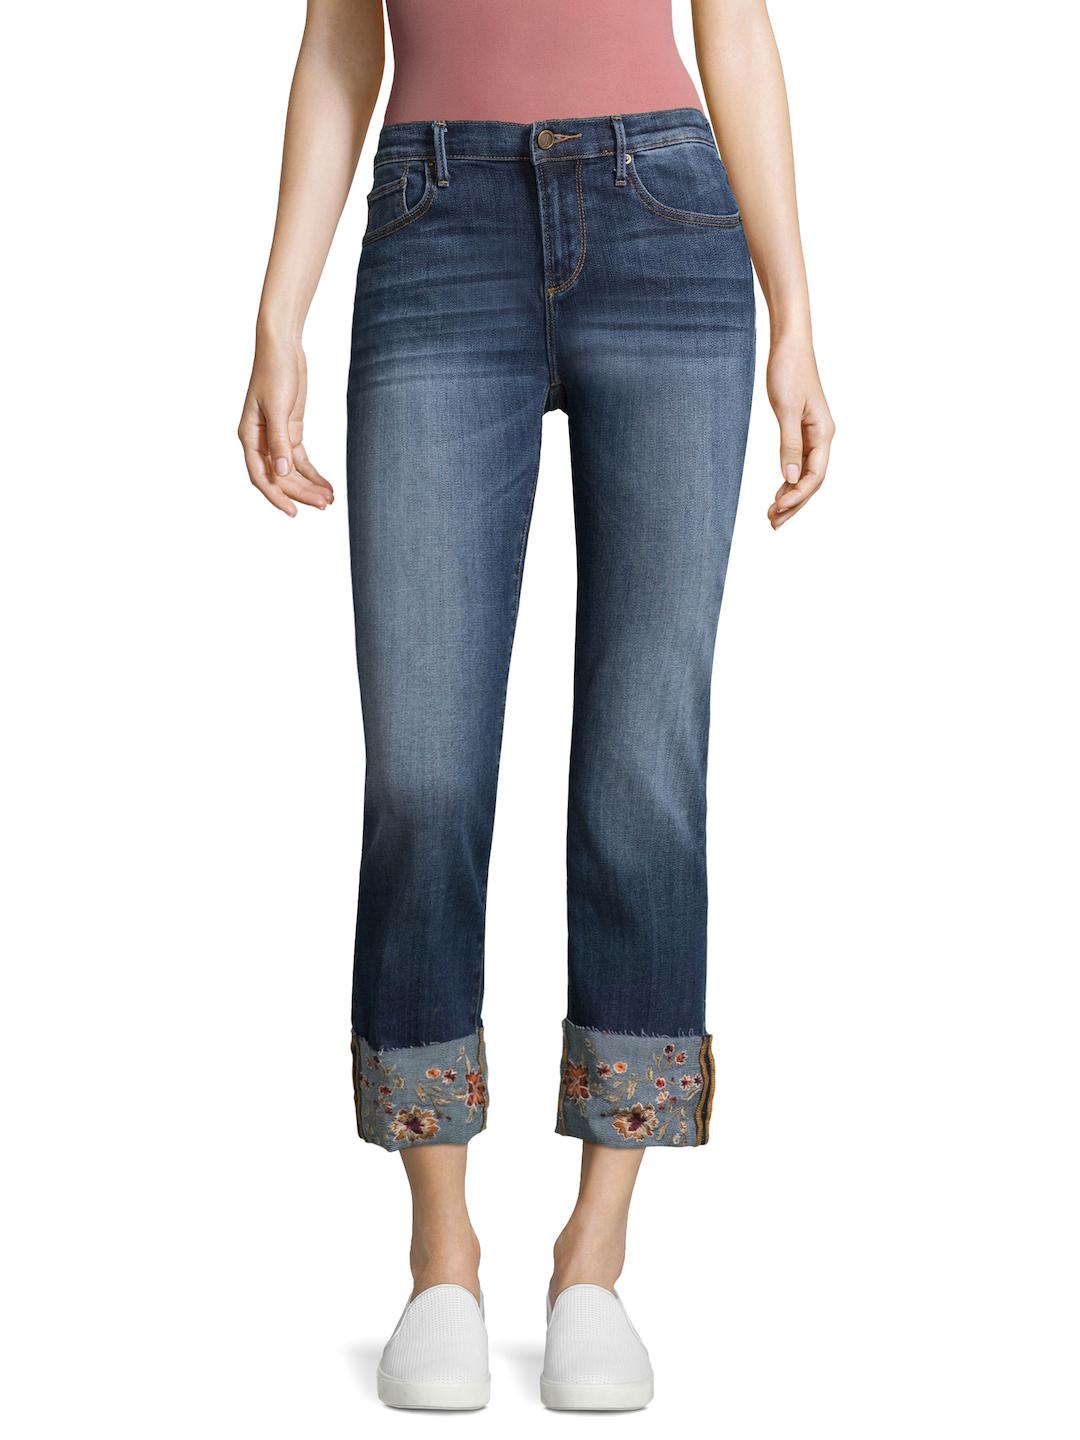 Driftwood Jeans Denim Colette Cropped Jeans in Blue - Lyst